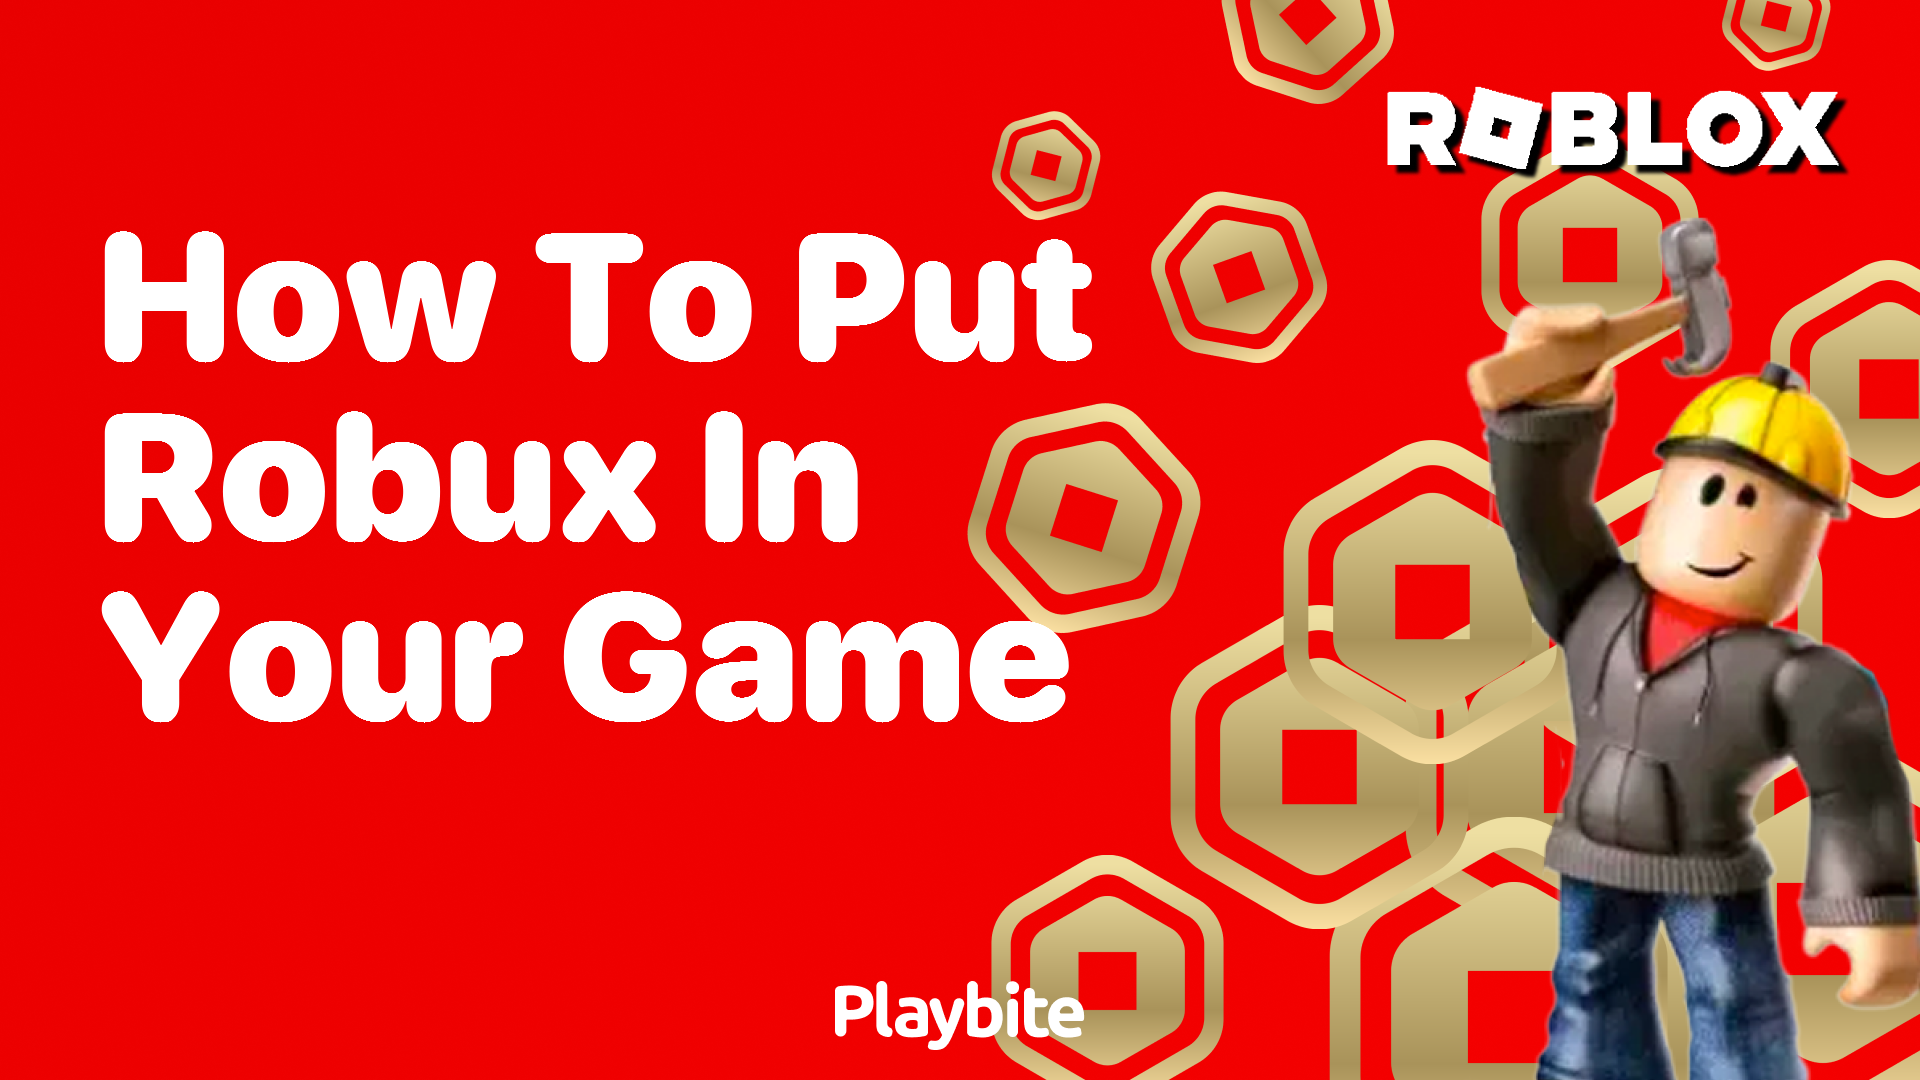 How to Put Robux in Your Game on Roblox